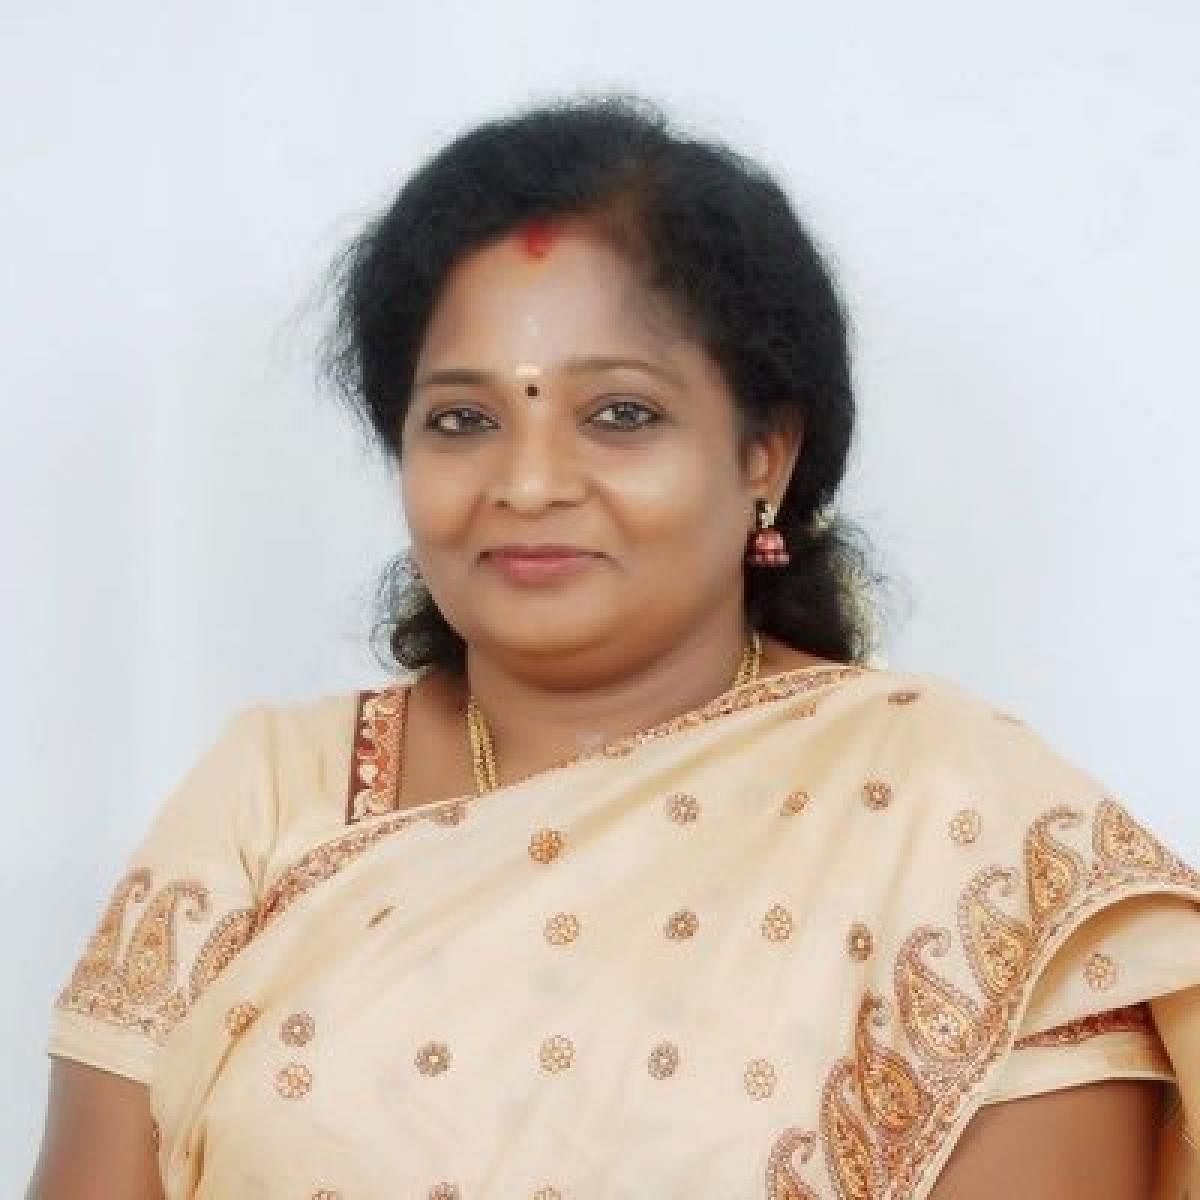 BJP leader Tamilisai Soundararajan said her father, a Congress veteran, would be happy about her decision to choose the path she wanted to tread. (Twitter Image)